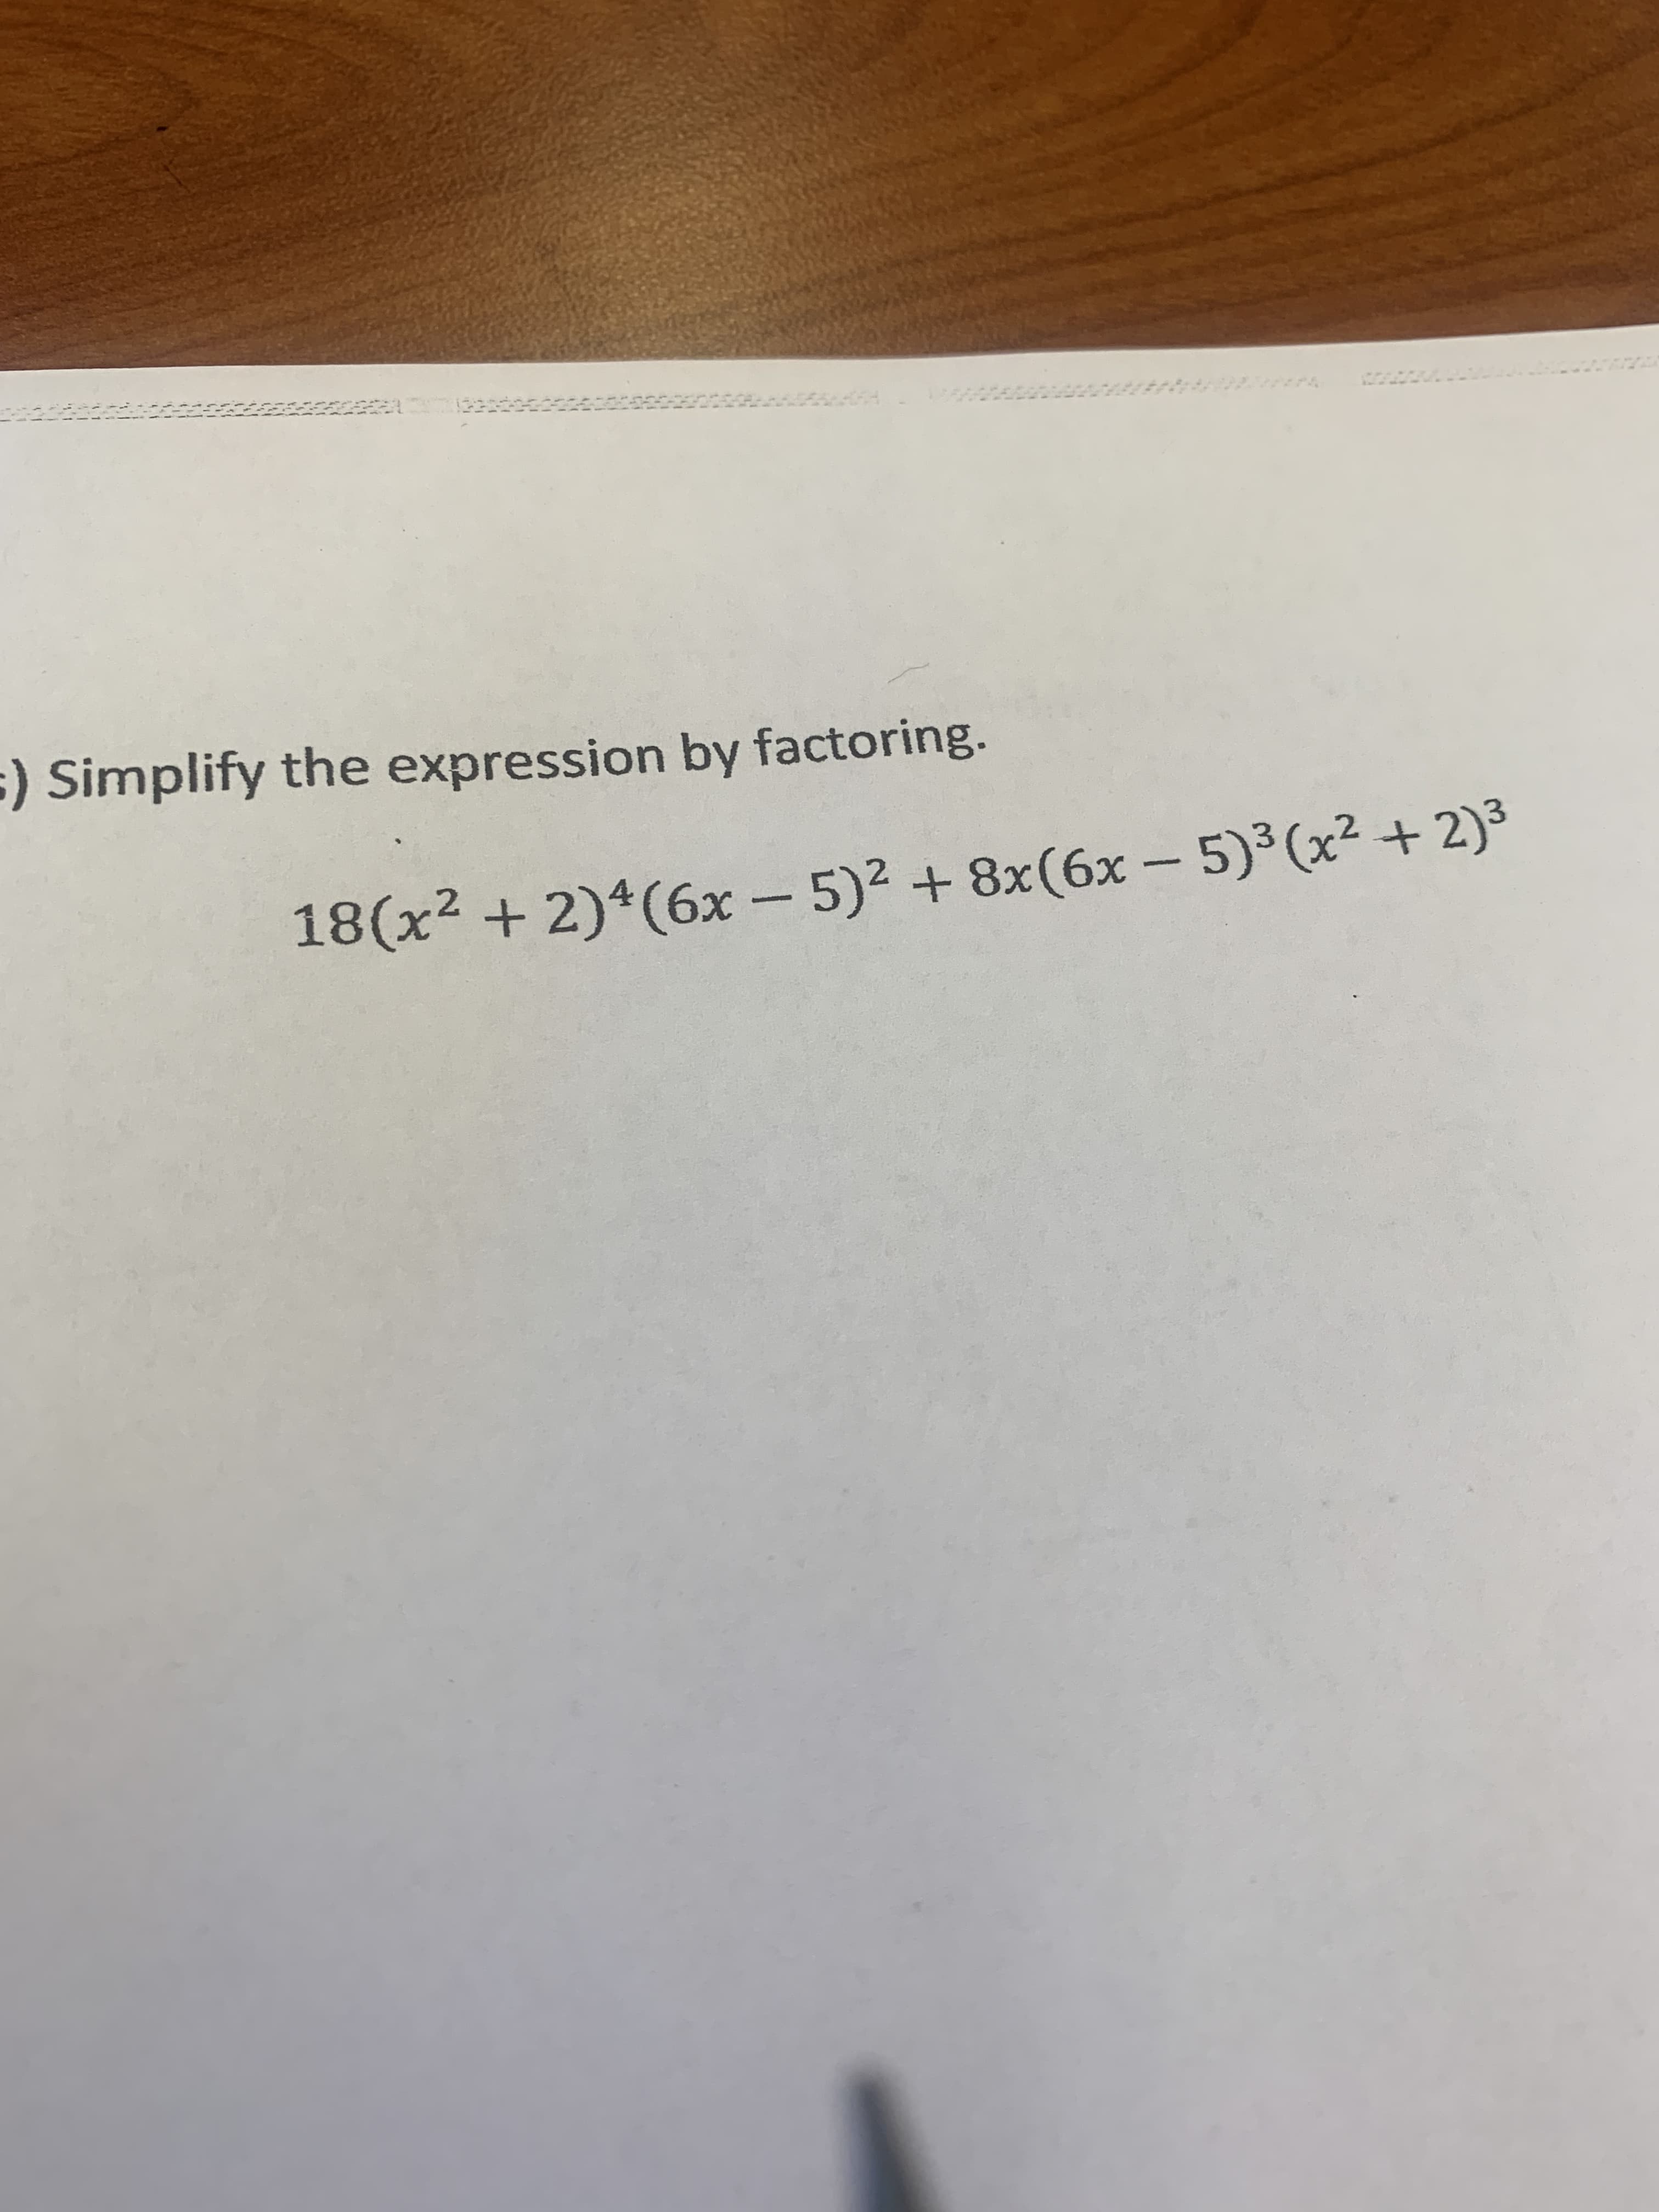 Simplify the expression by factoring.
